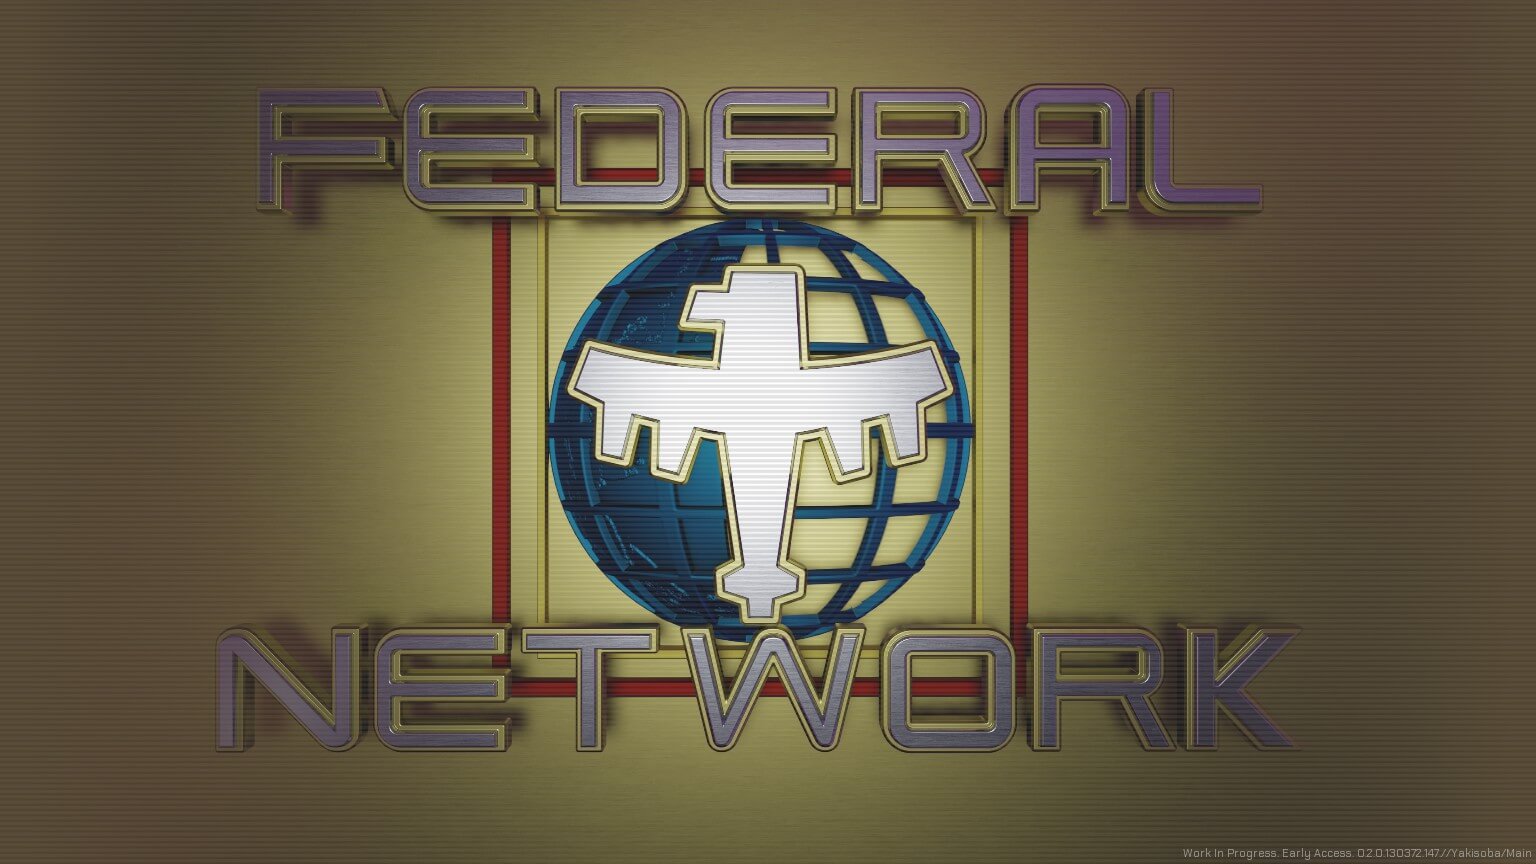 A logo of a white bird with a yellow outline, a globe behind it in blue and a red box. This is a news network shown before entering games.